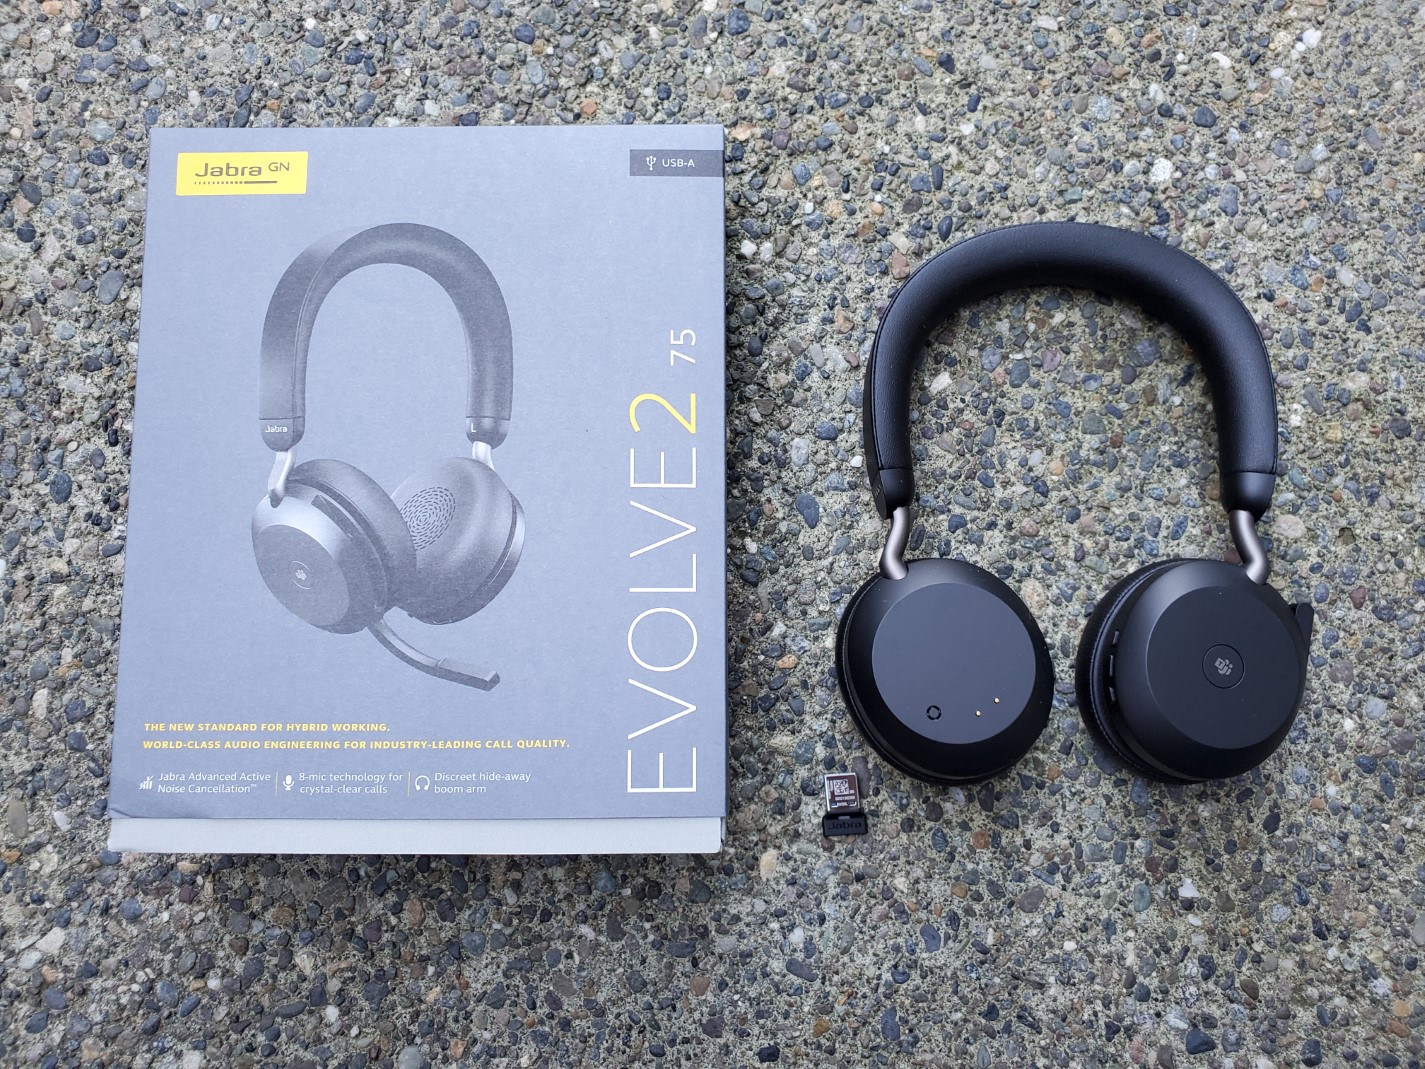 ZDNET talk and | 24 headset for Optimized review: with 75 hour hybrid time Evolve2 work Jabra ANC